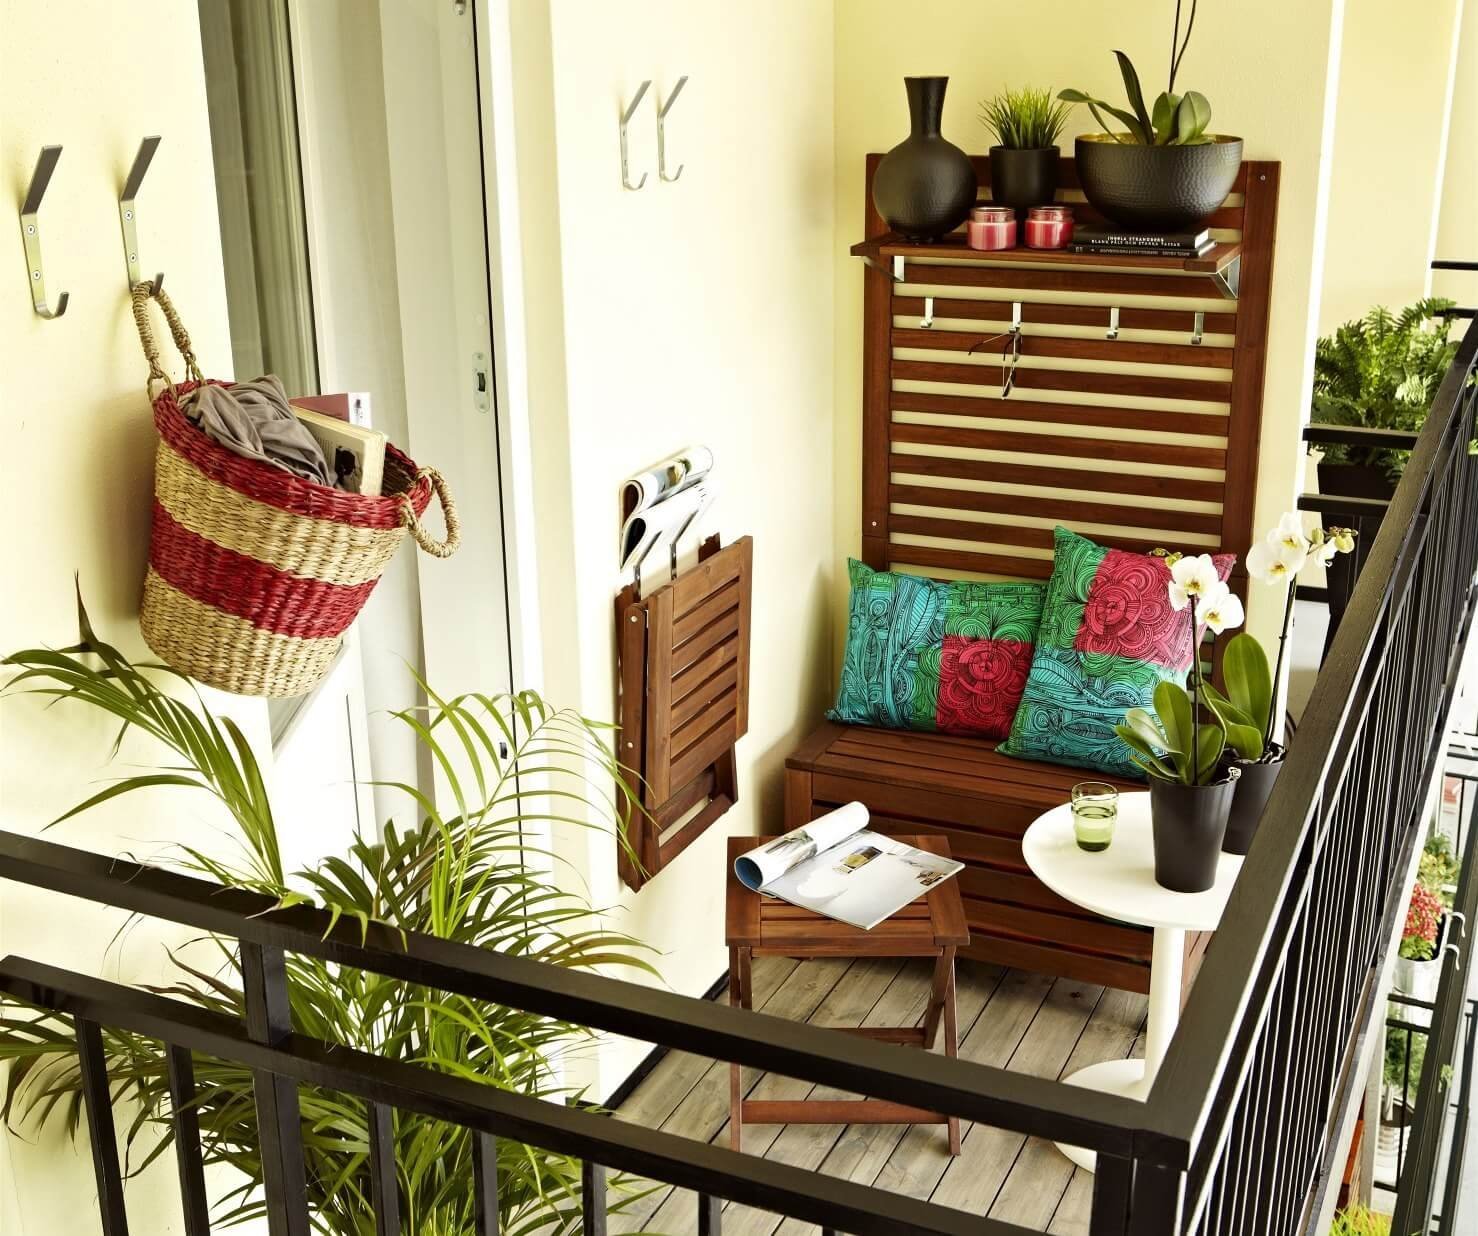 18 Gorgeous Ideas to Decorate Your Tiny Balcony on a Budget